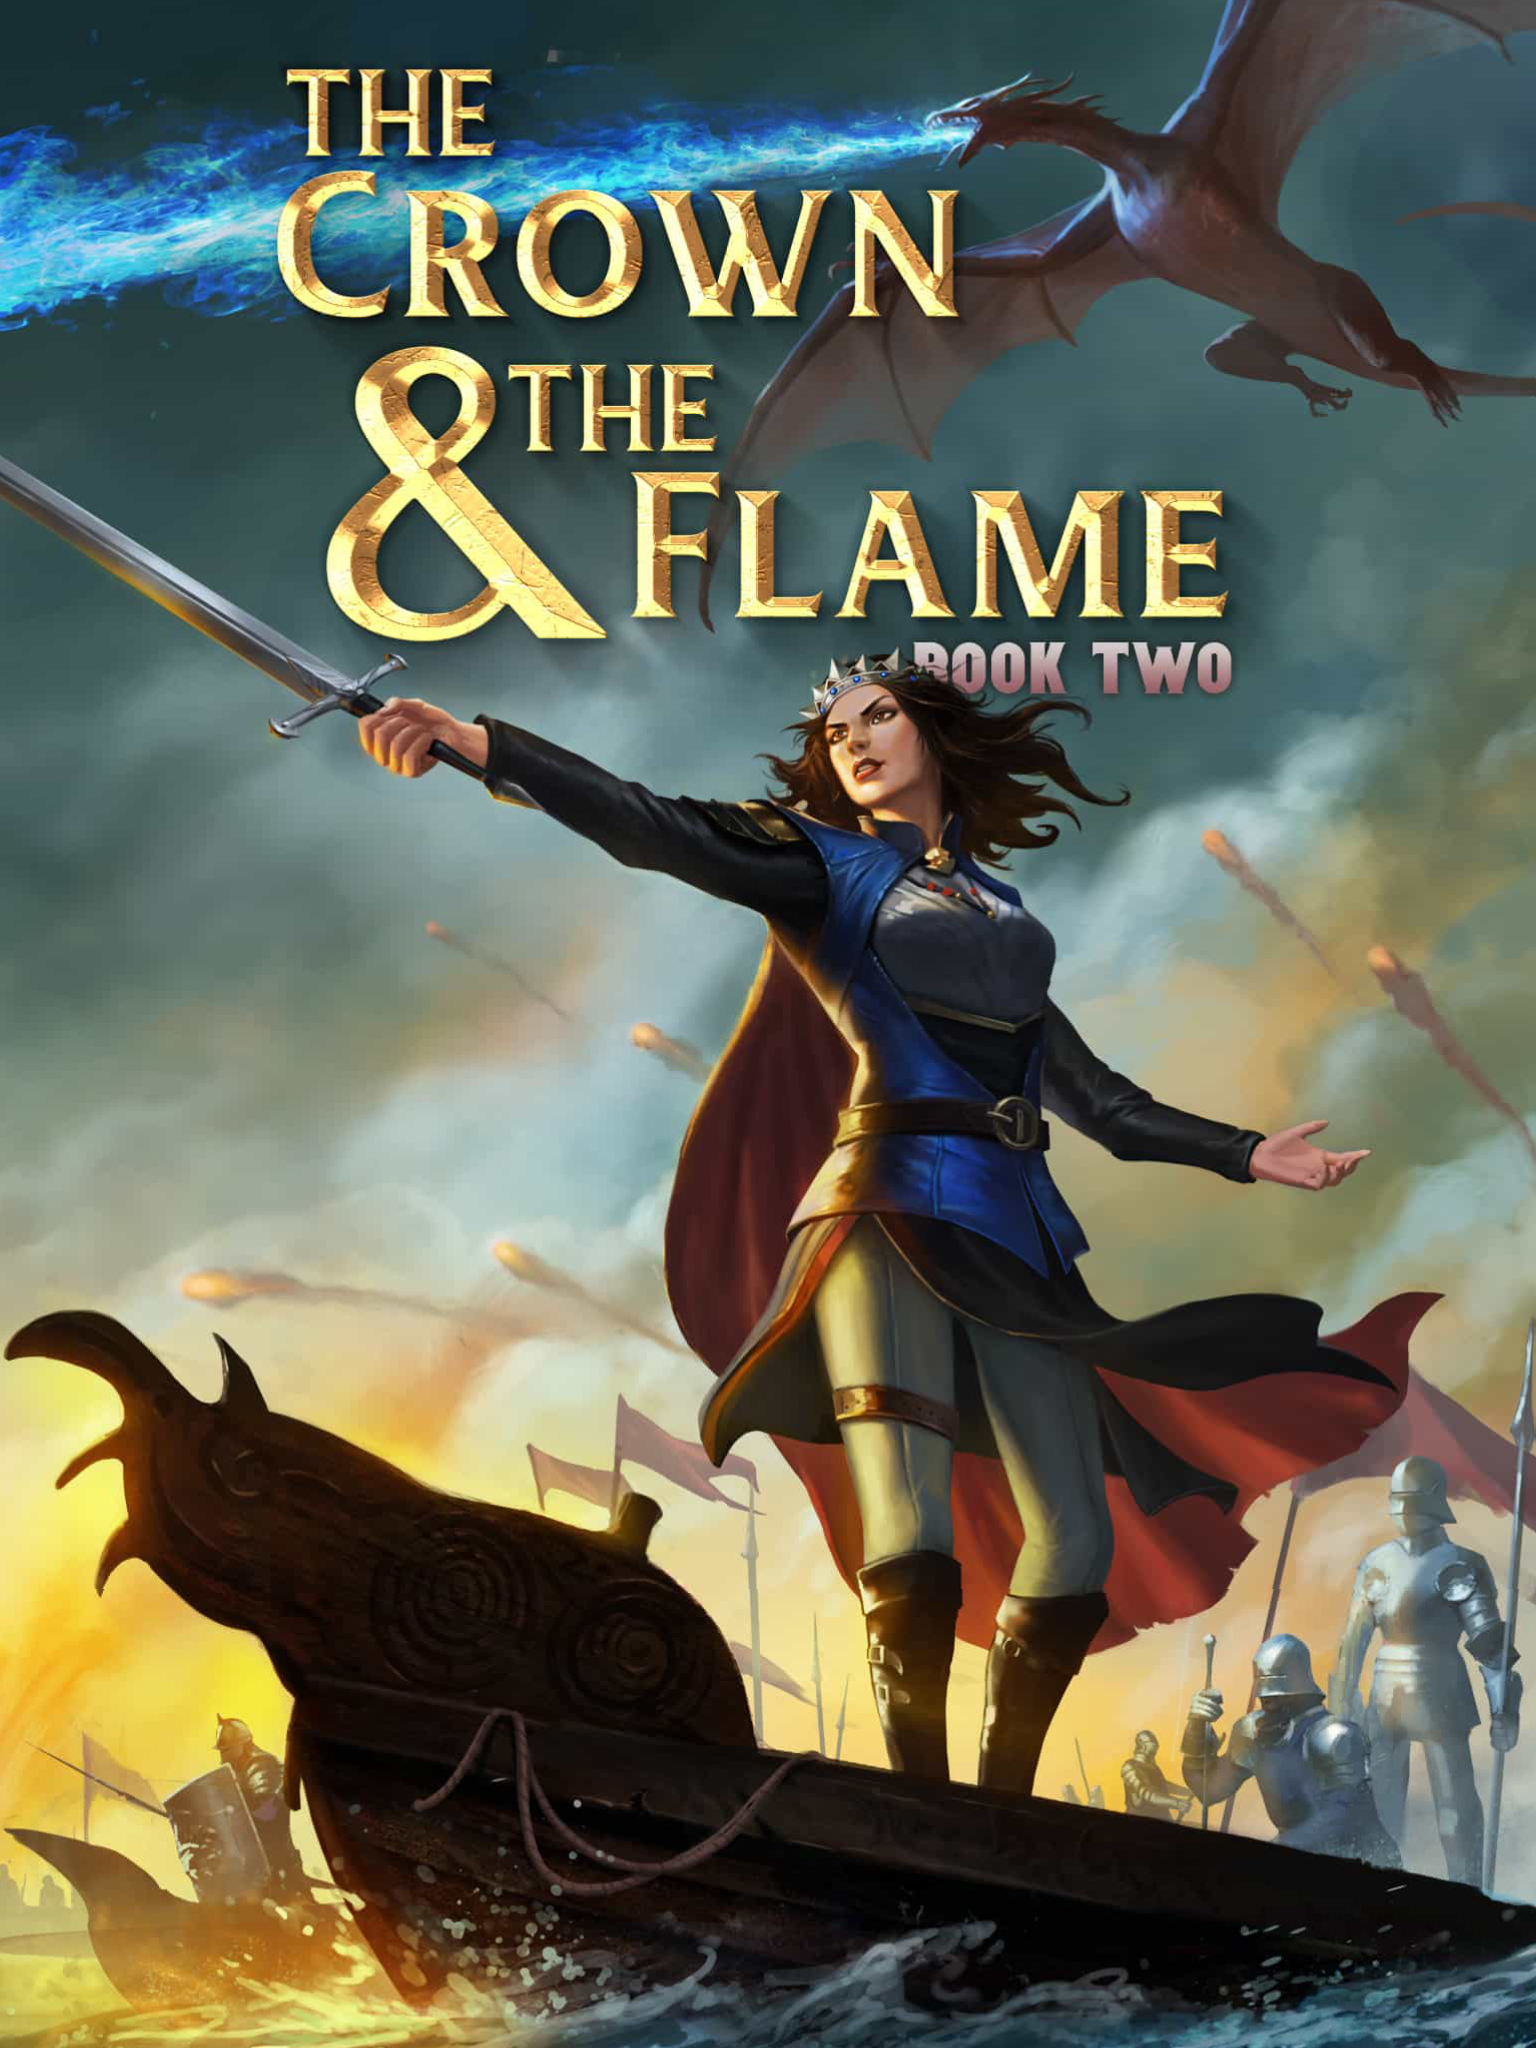 the-crown-the-flame-book-2-choices-choices-stories-you-play-wikia-fandom-powered-by-wikia